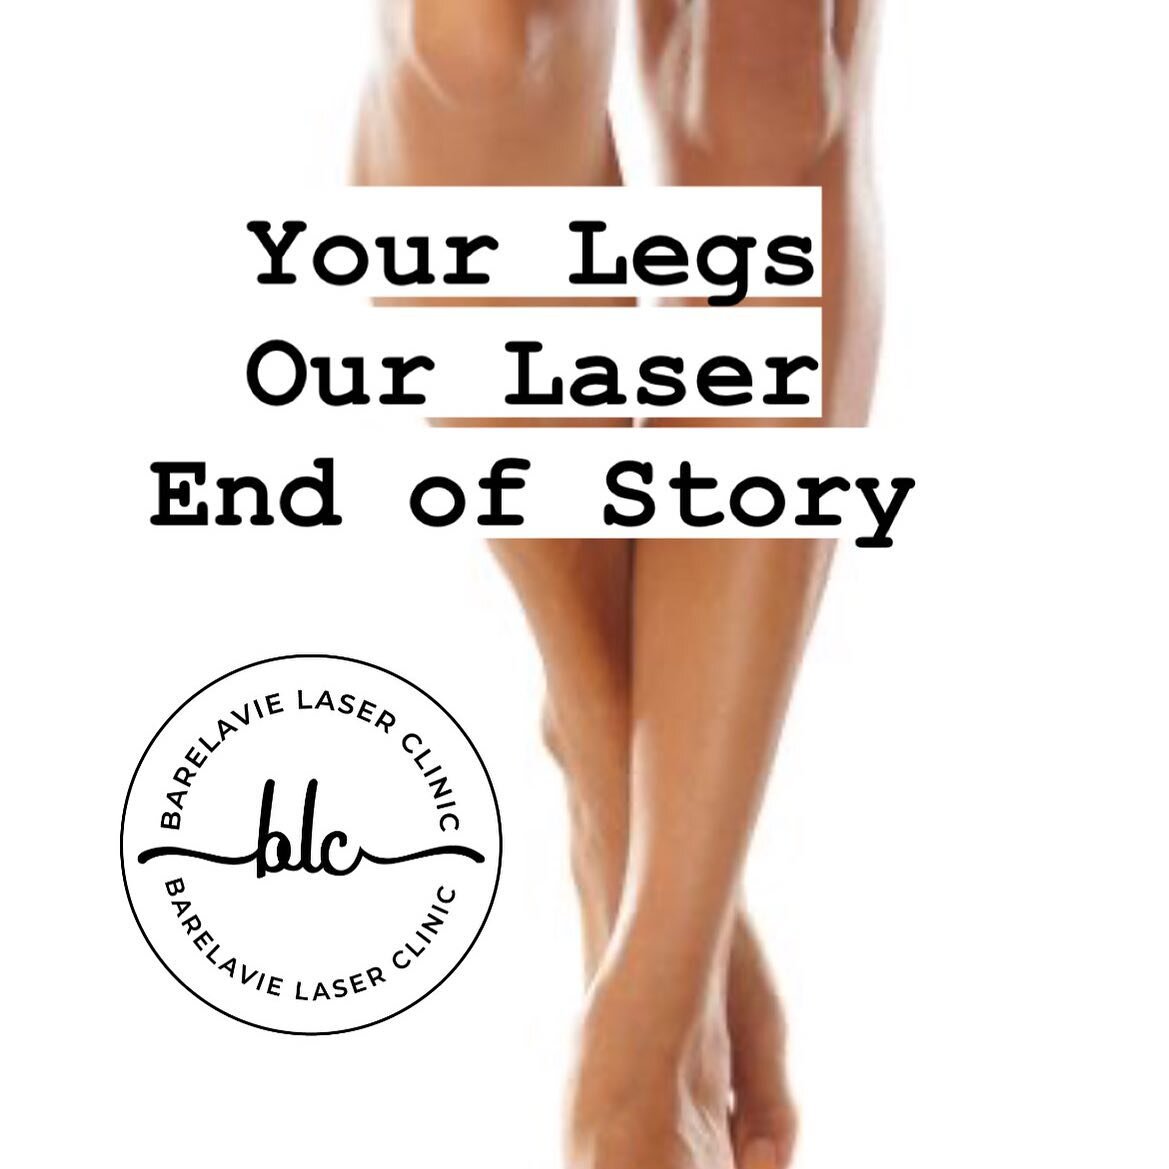 Say Goodbye to razors 🪒 and Hello to Laser Hair Removal at Barelavie Laser Clinic! 

Our machines are medical grade, advanced technology, Health Canada and FDA Approved! 

✨ Non-invasive with no downtime 
✨ Long term hair reduction 
✨ Safe and Preci